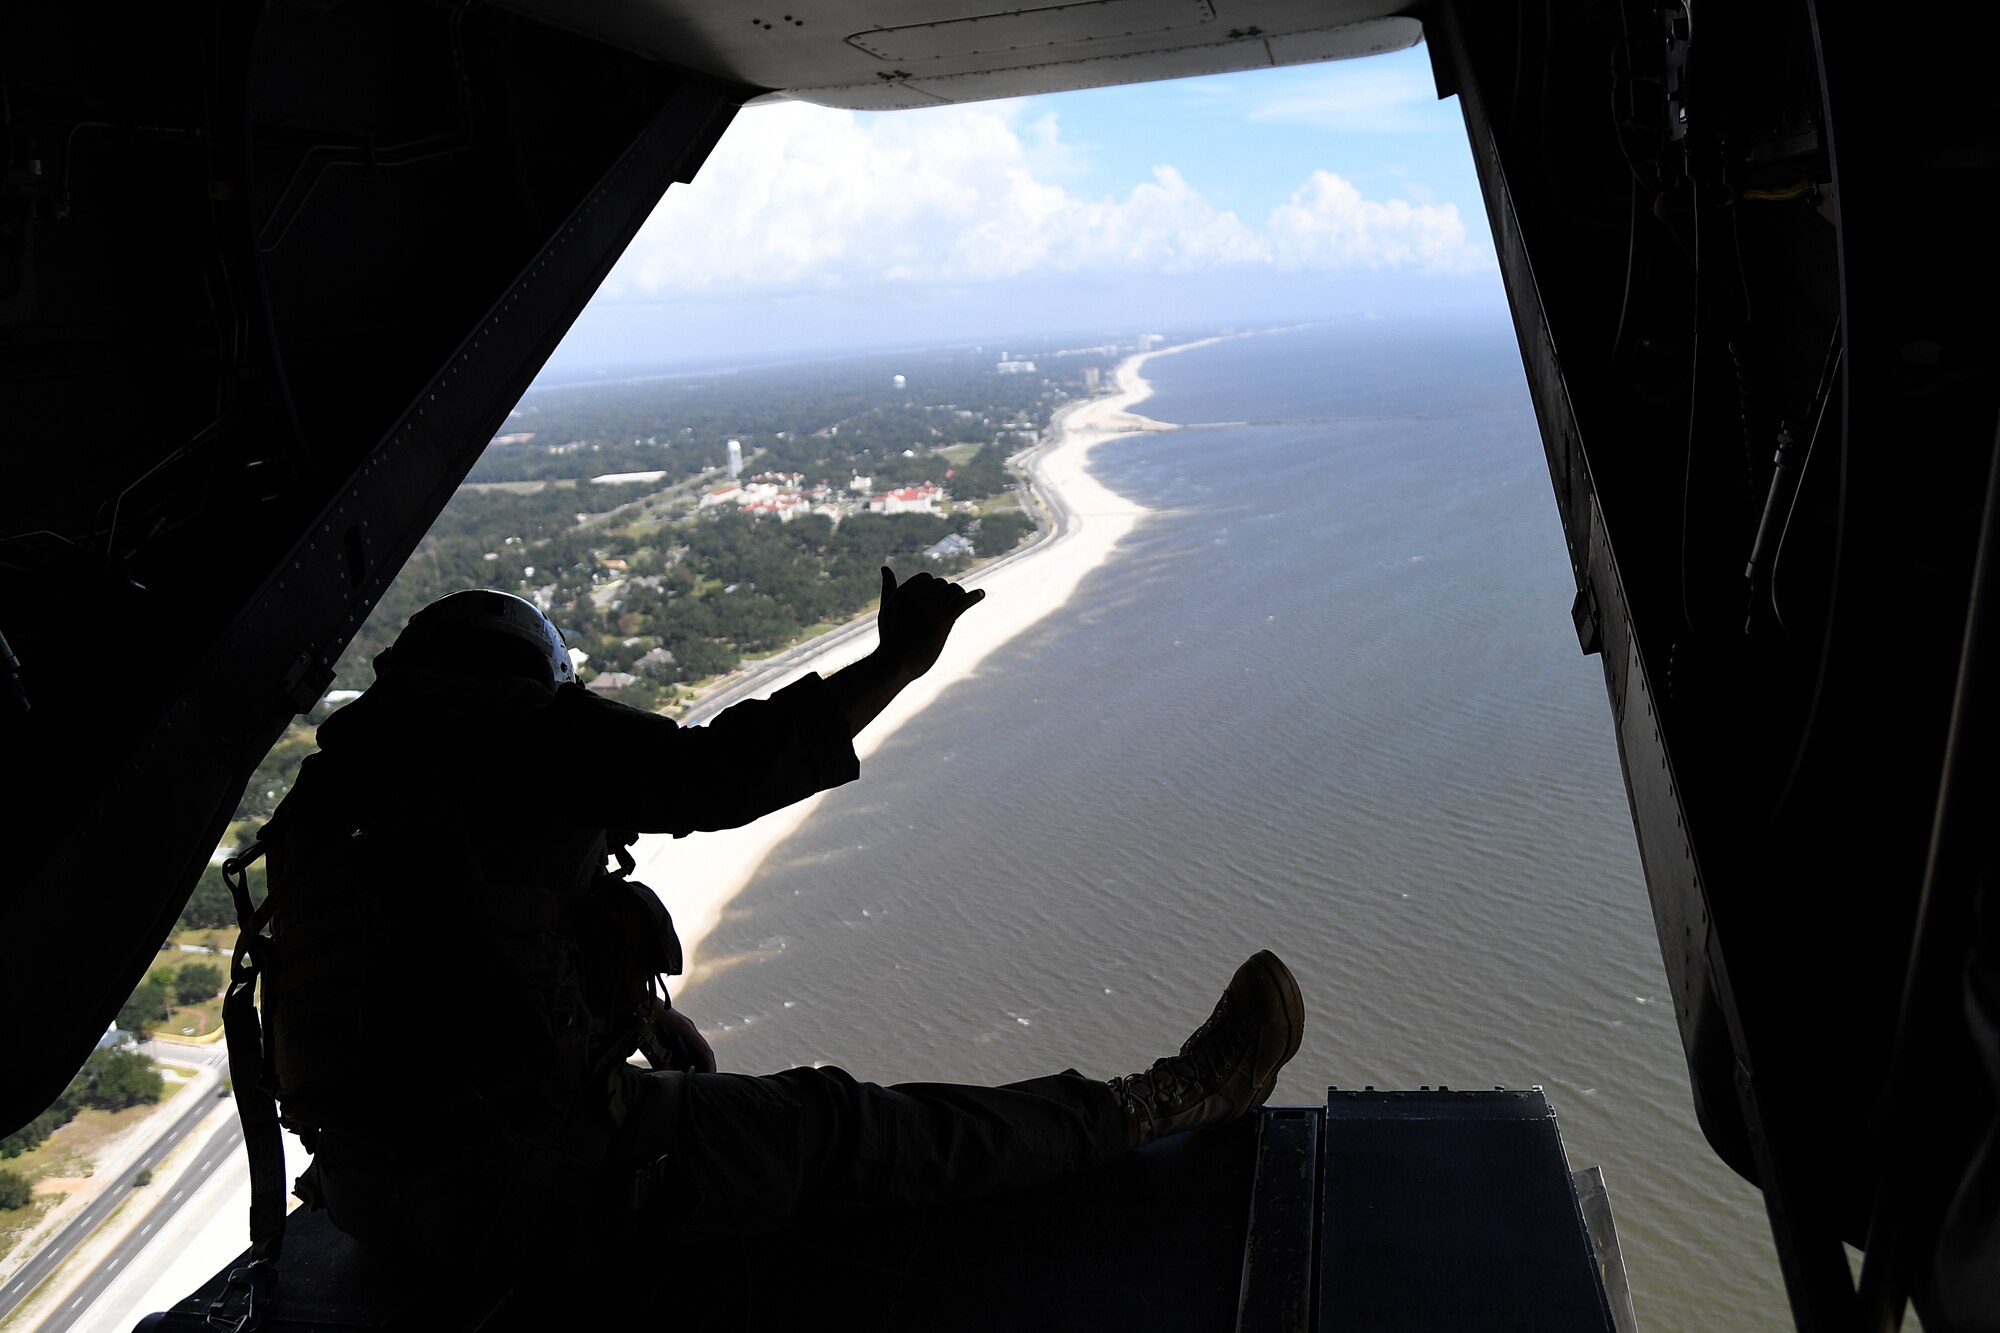 U.S. Marine Corps Staff Sgt. Jake Clark, Marine Medium Tiltrotor Squadron 774 MV-22B Osprey crew chief, Naval Air Station Norfolk, Virginia, sits on the back of an MV-22B Osprey over Gulfport, Mississippi, Oct. 23, 2020. Marines came to Keesler to conduct routine training operations in and around the Mississippi area. (U.S. Air Force photo by Senior Airman Suzie Plotnikov)